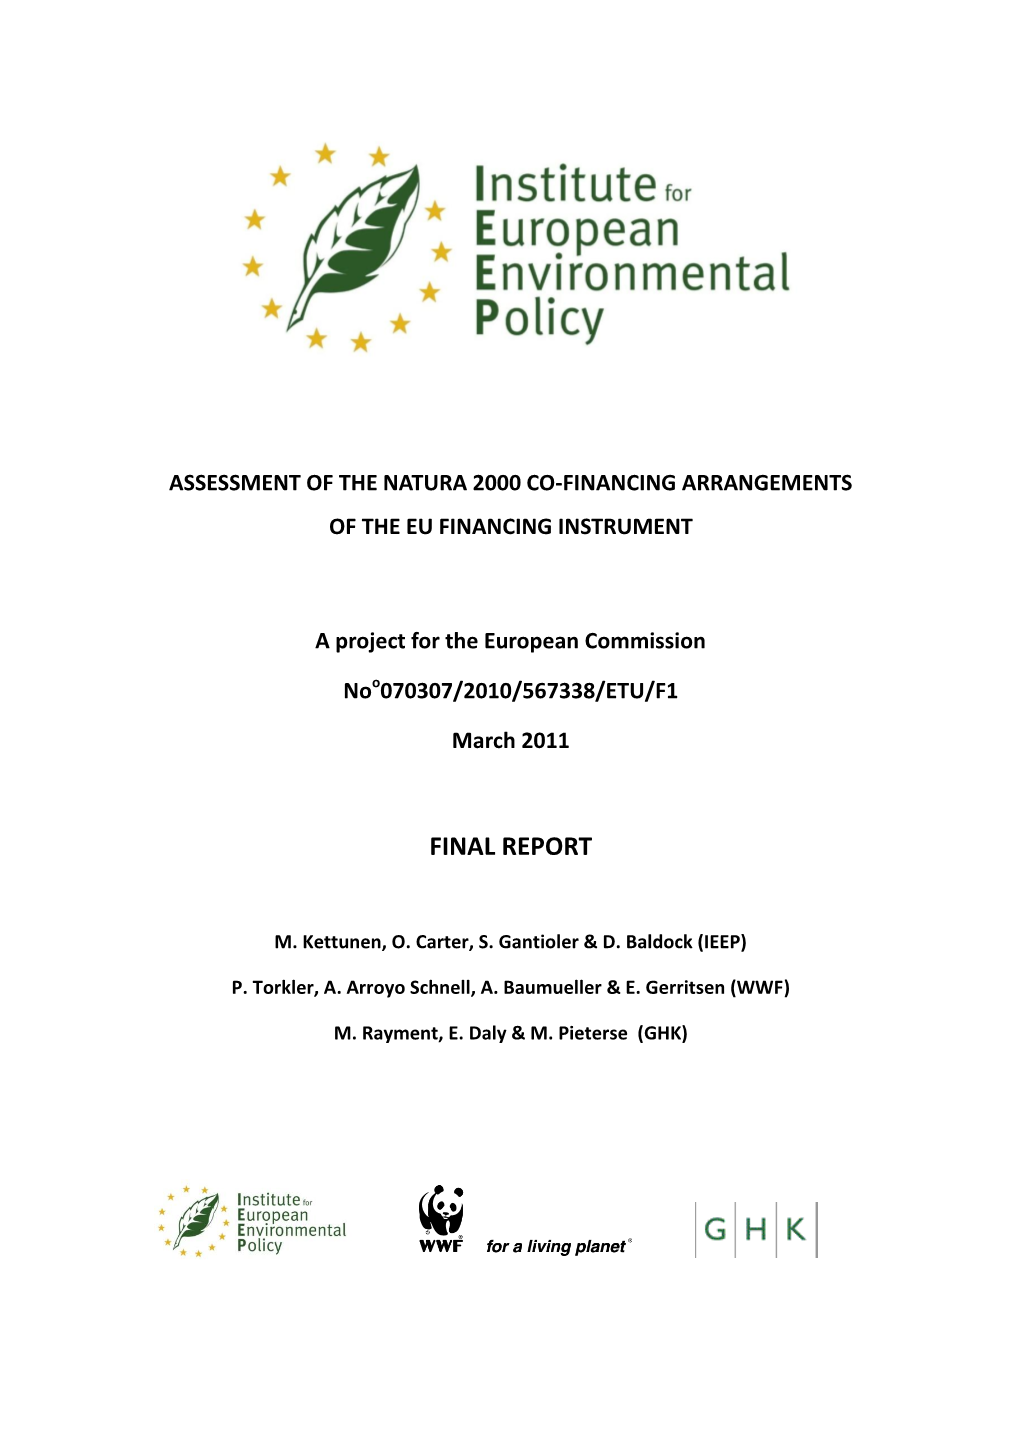 Assessment of Natura 2000 Co-Financing